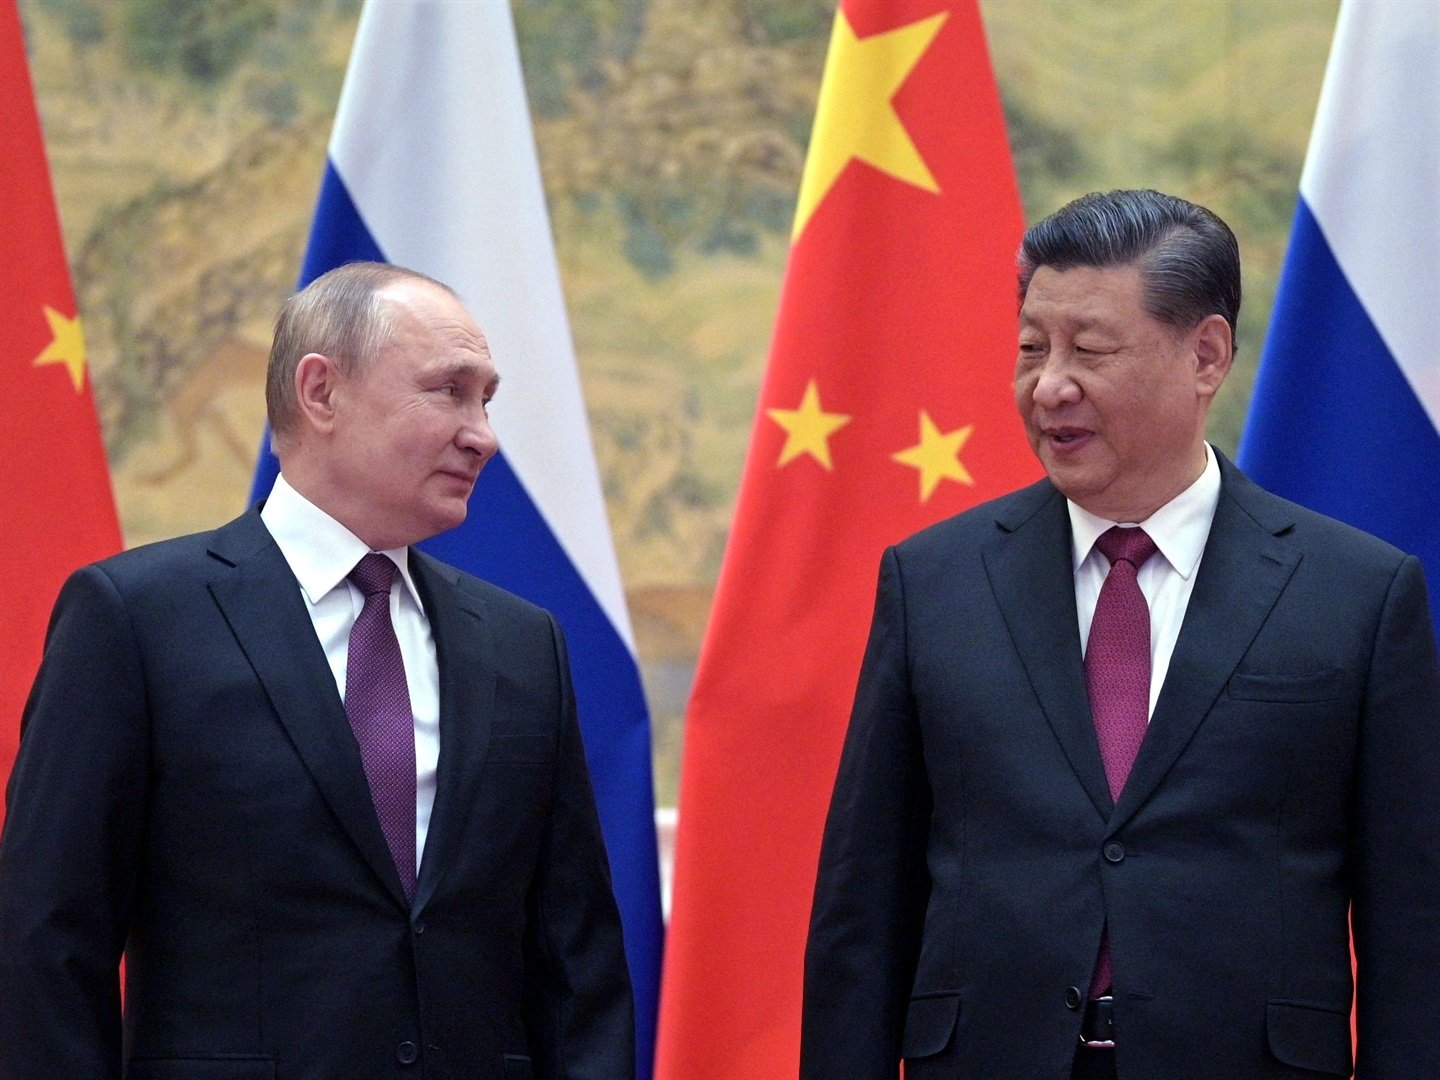 Russian President Vladimir Putin (L) and Chinese President Xi Jinping will not be attending the G20 summit in India.